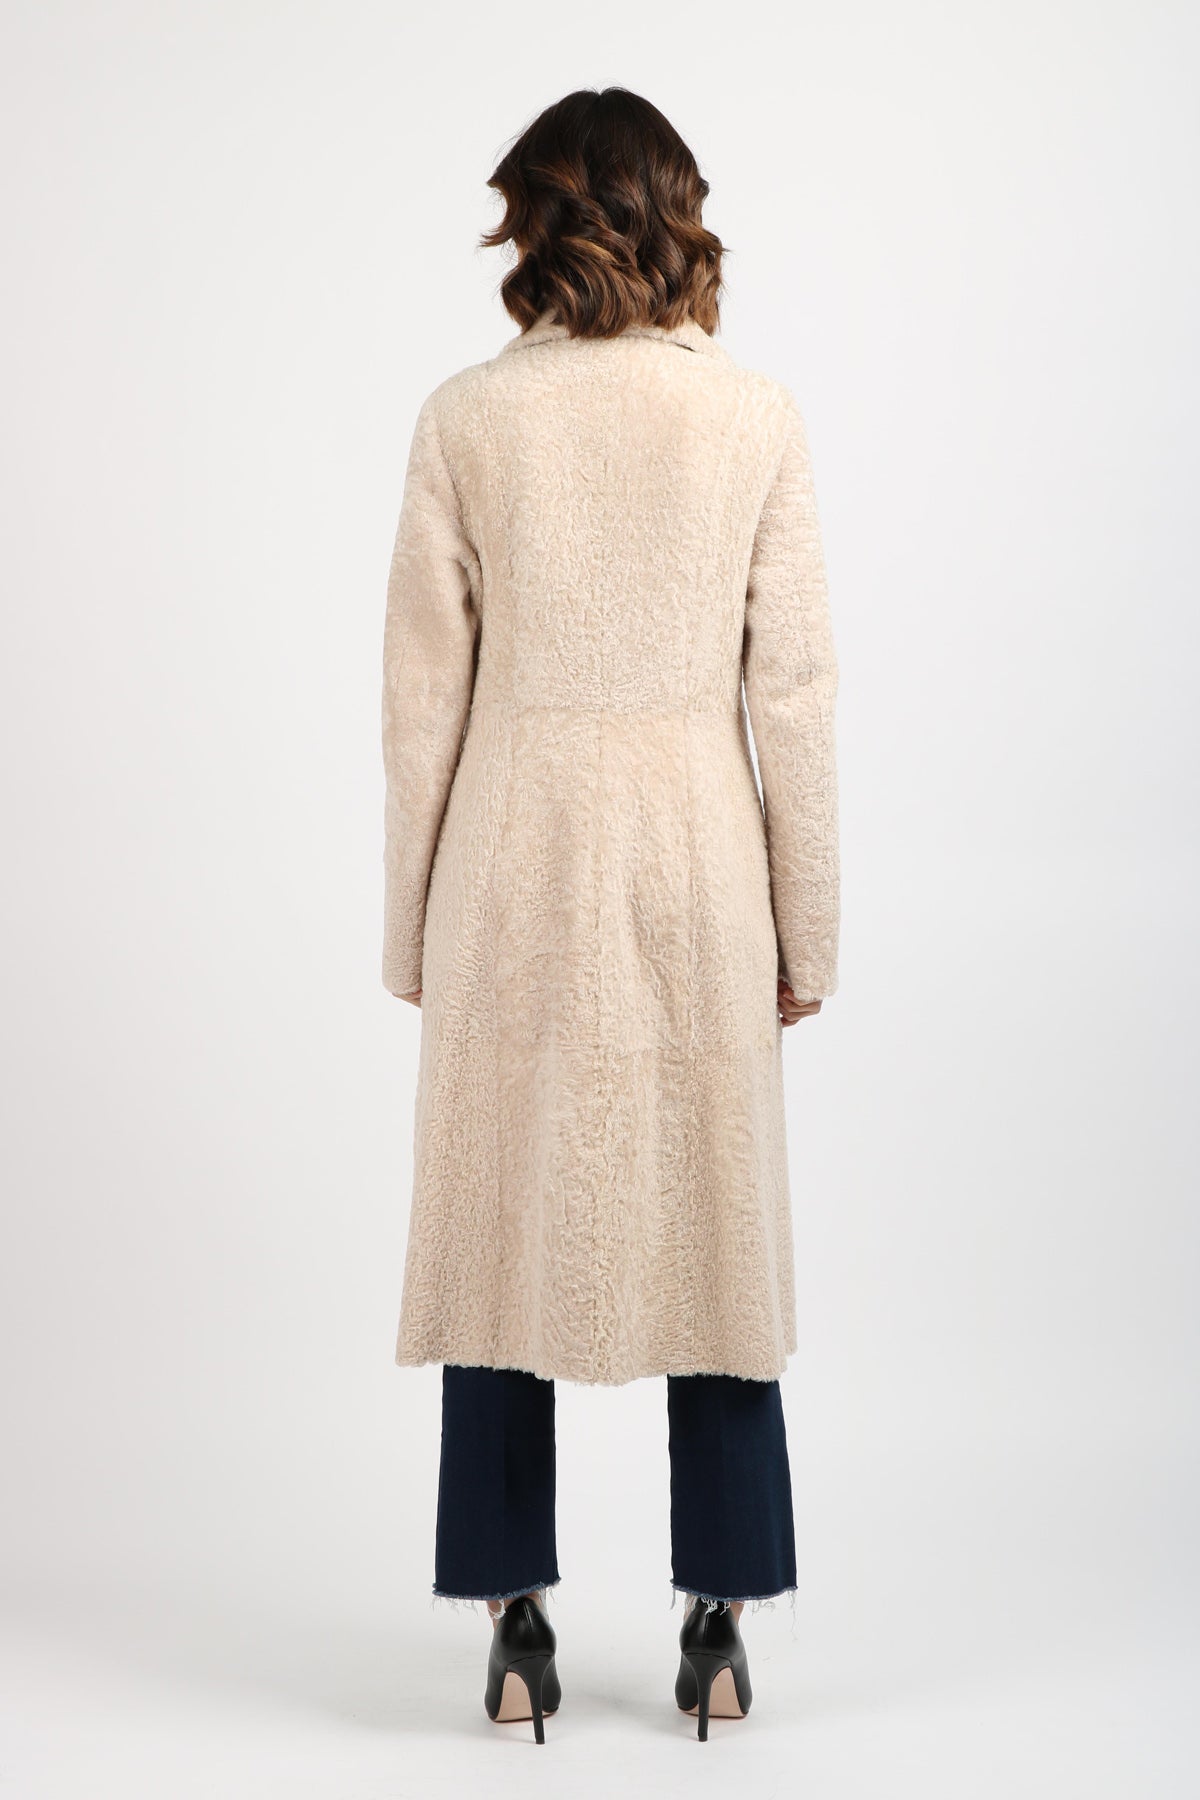 CAPPOTTO SHEARLING DOUBLE FACE IN MONTONE